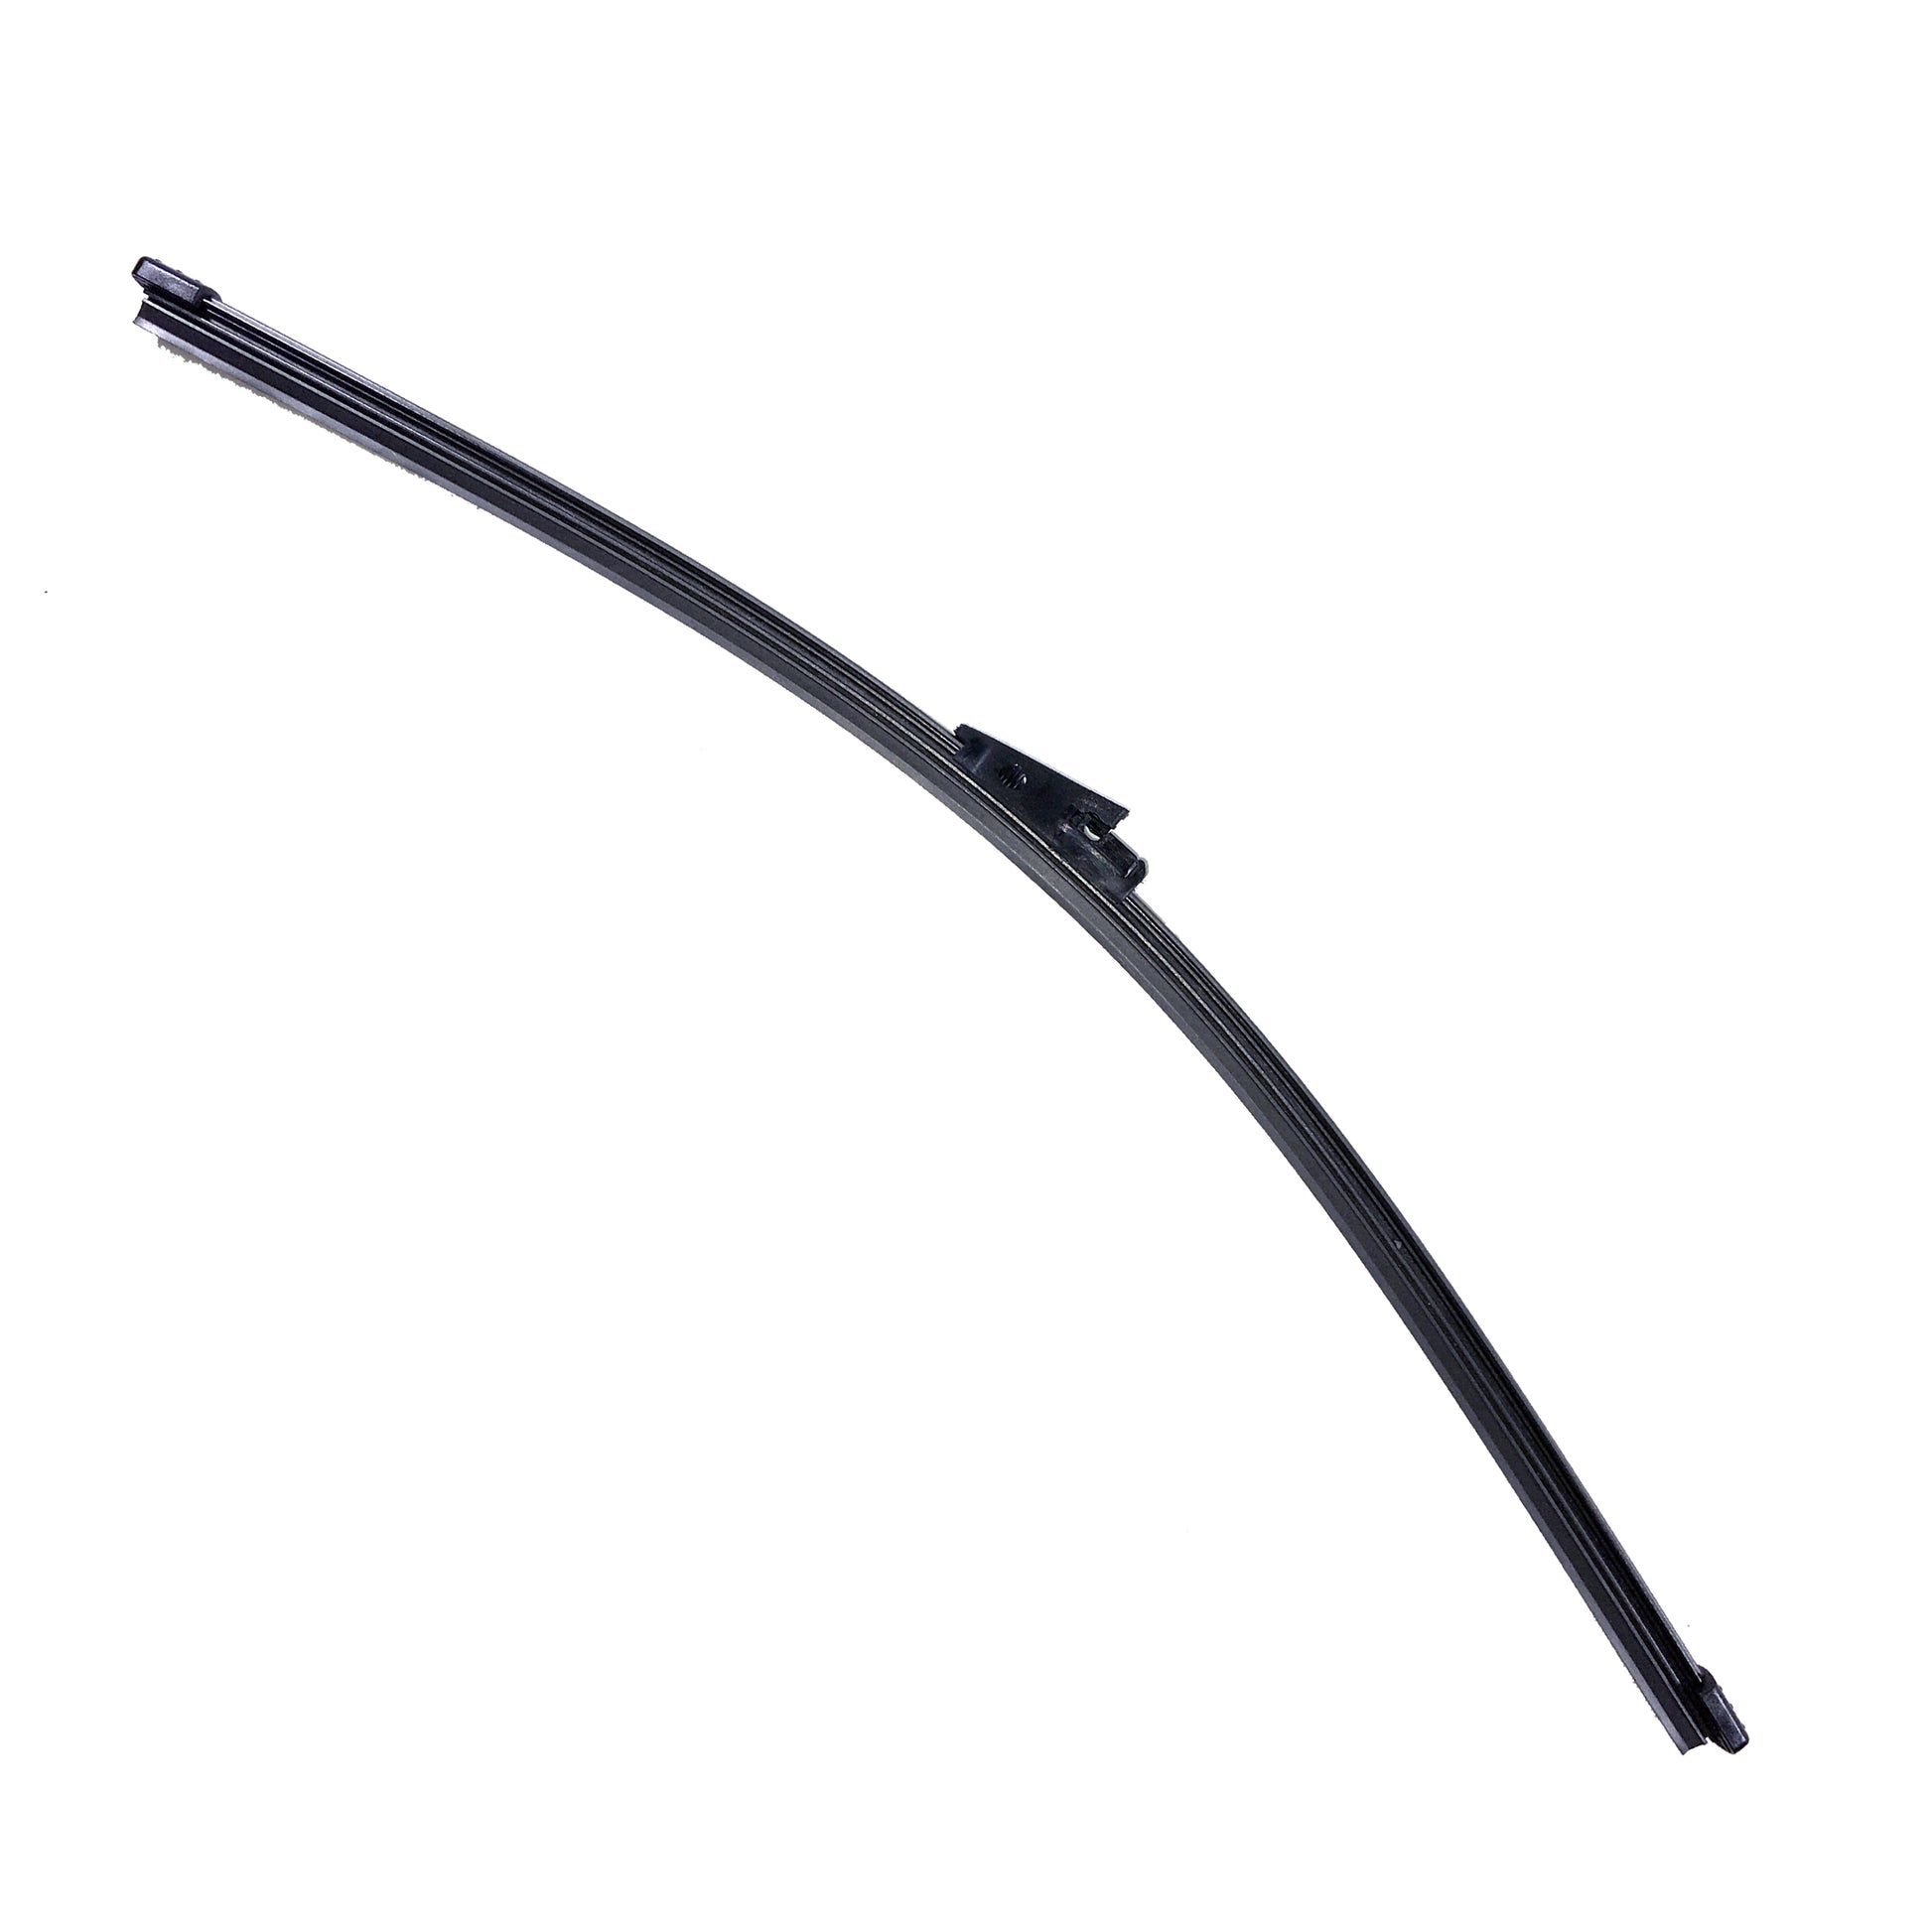 SEAT LEON 1P LATE Hatchback May 2009 to Dec 2012Rear Wiper Blade 